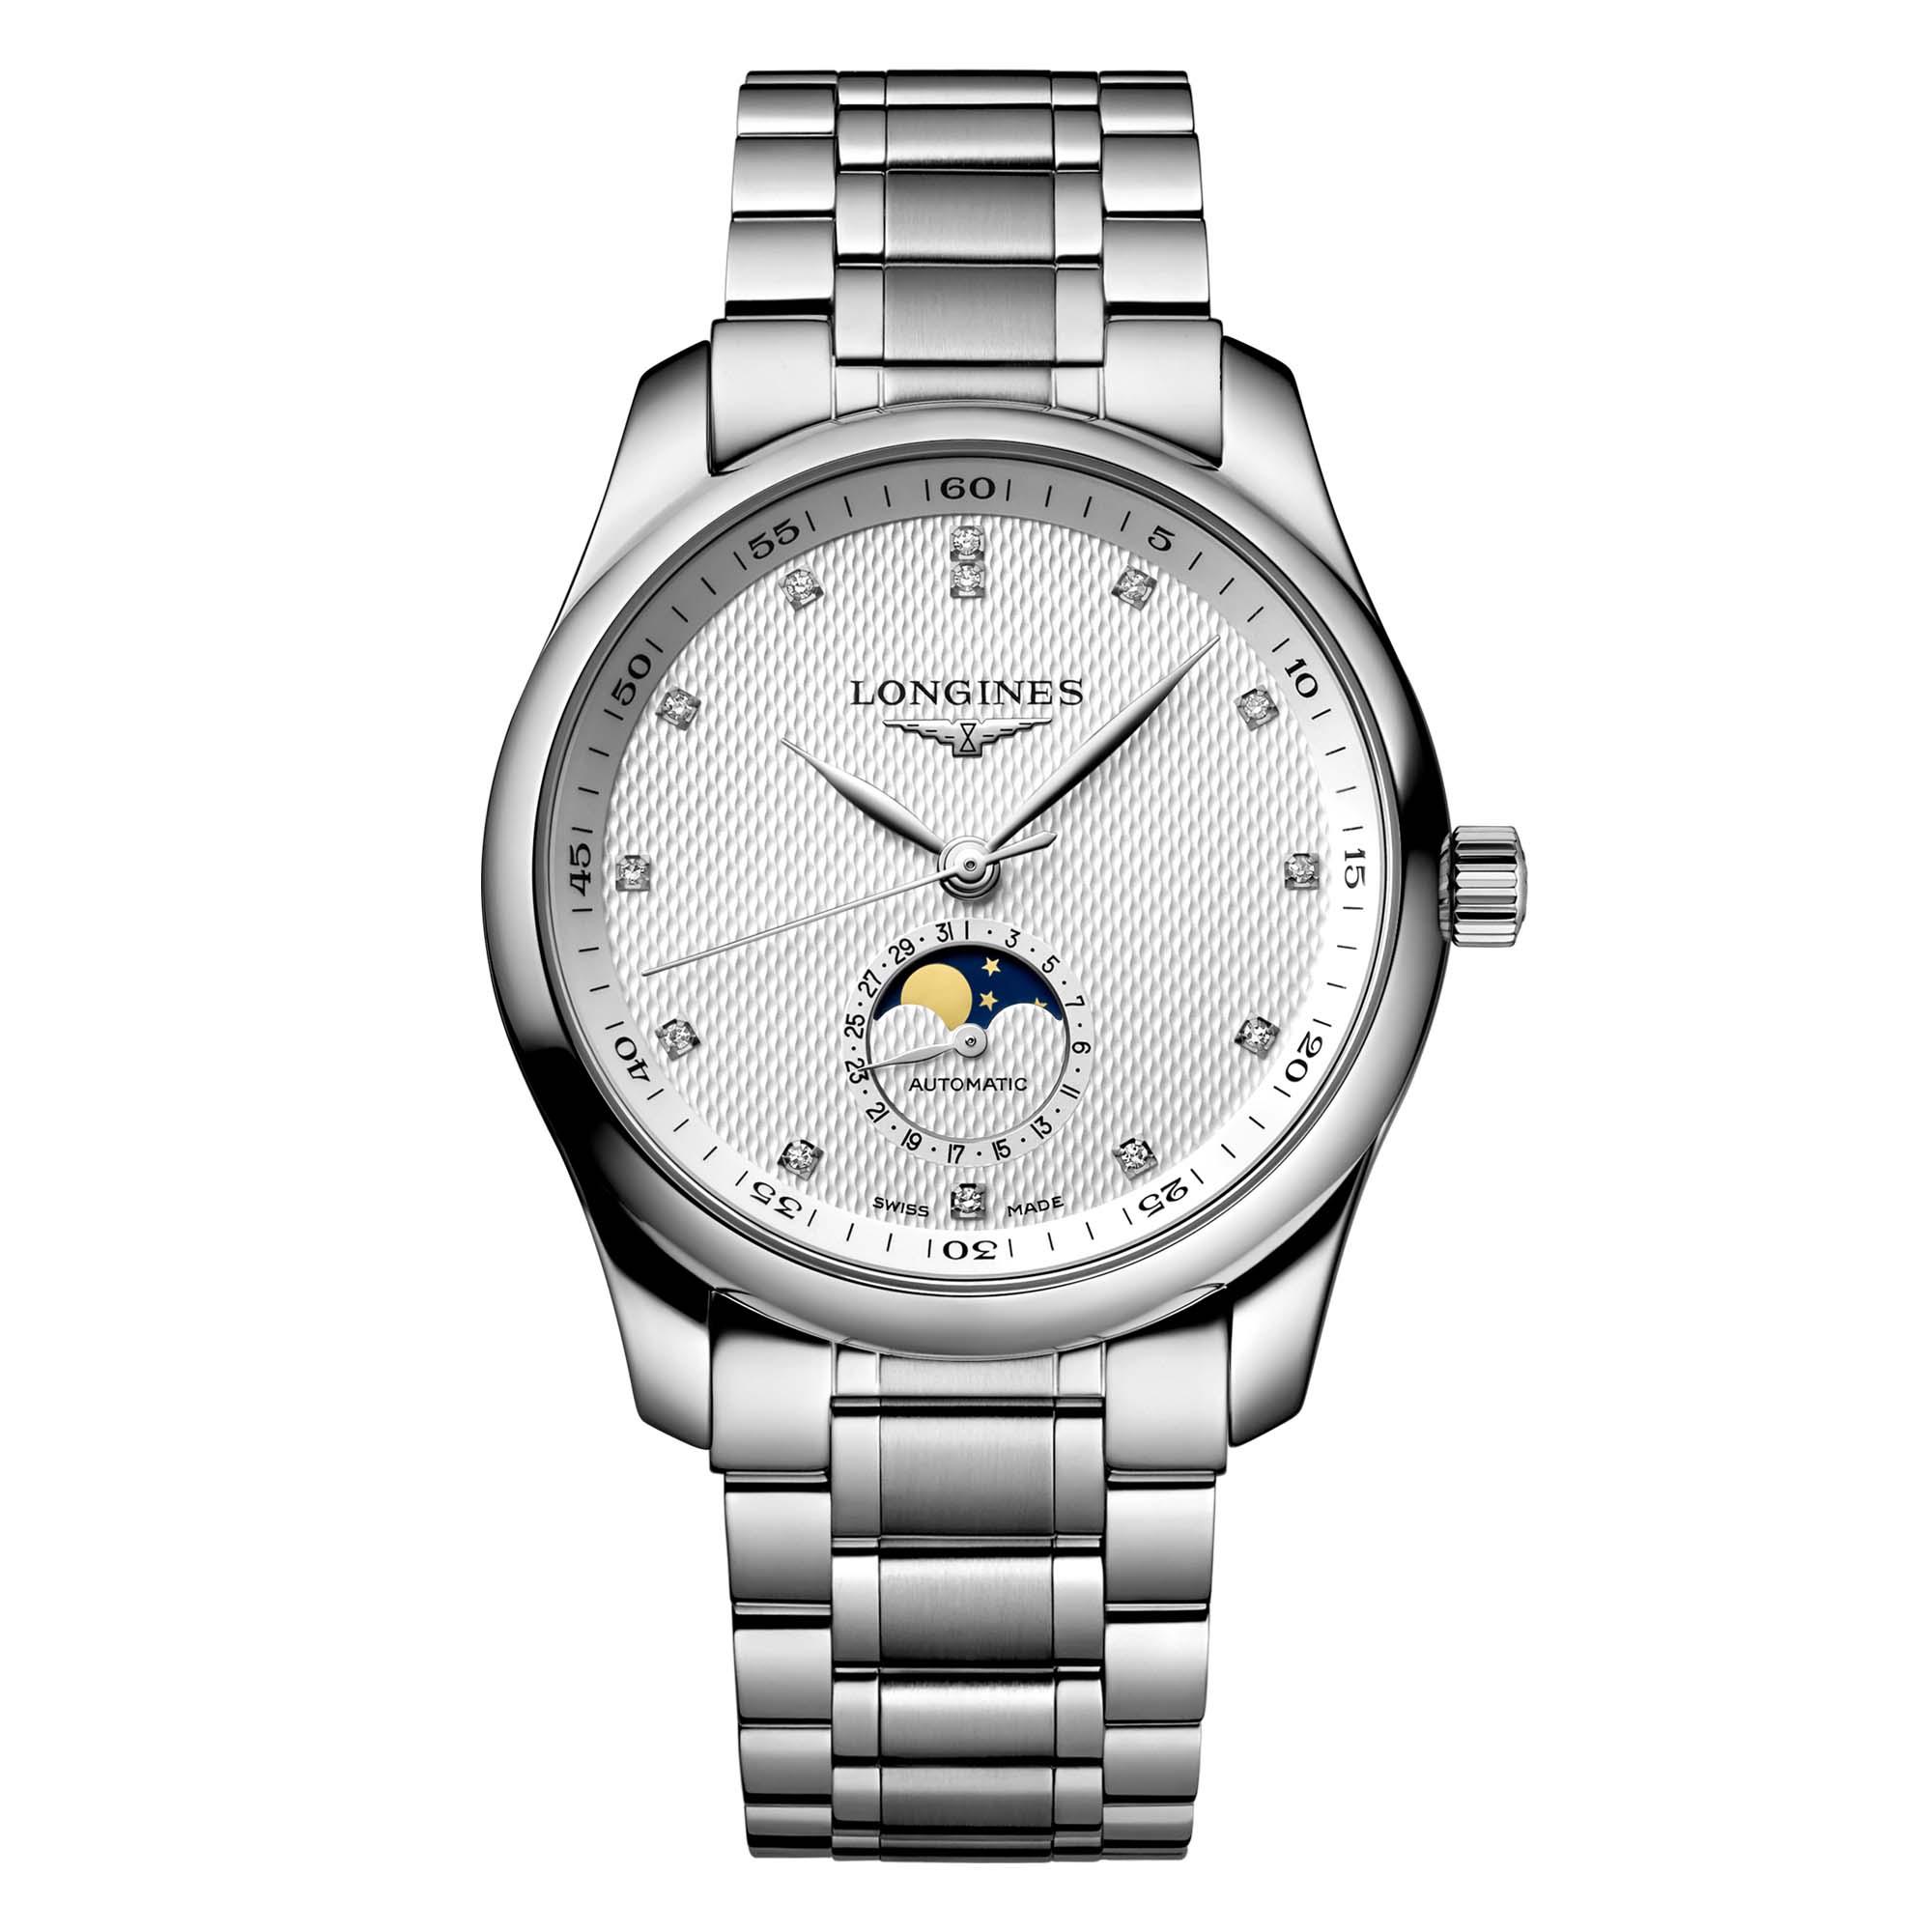 Longines The Longines Master Collection (Ref: L2.909.4.77.6)